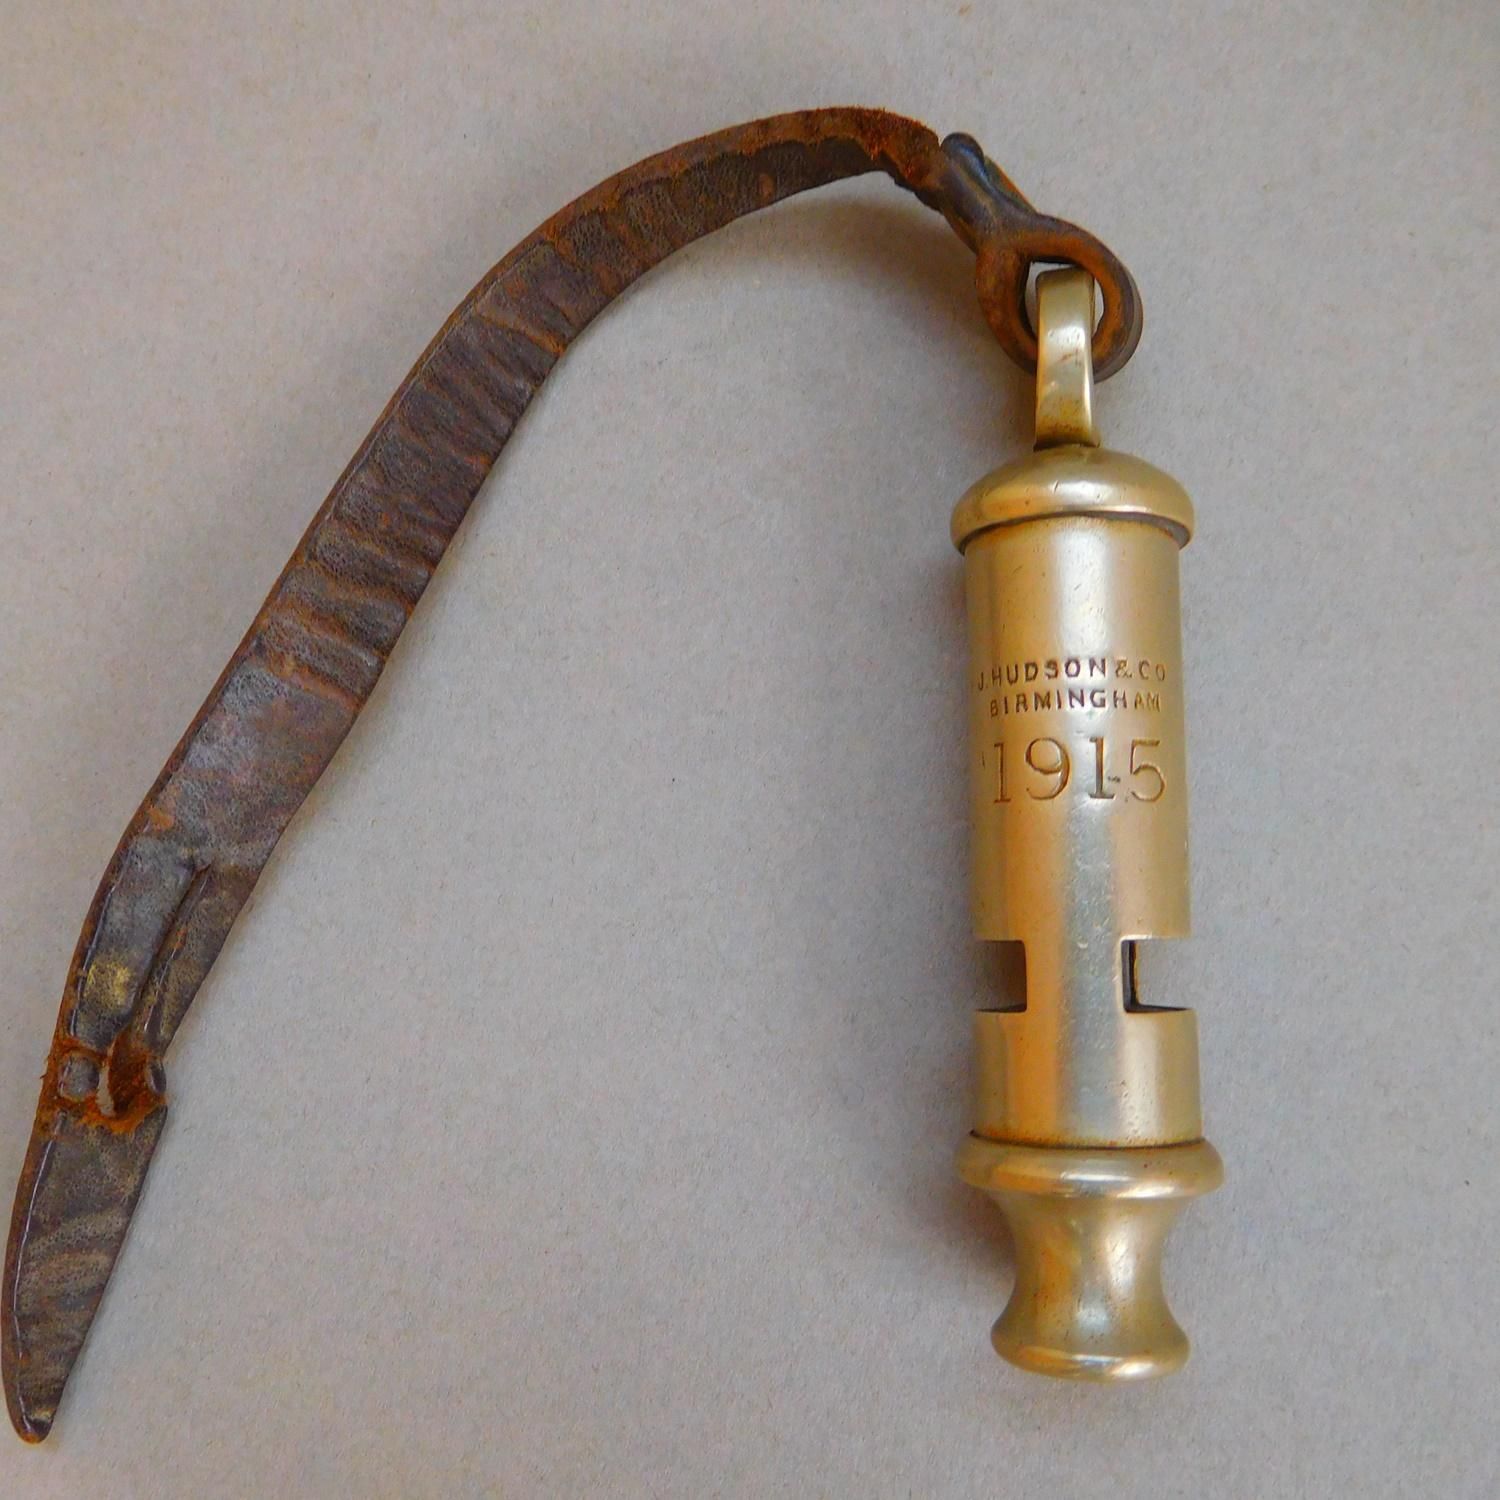 A WW1 1915 dated Trench Whistle by J Hudson & co - Militaria - Hemswell ...